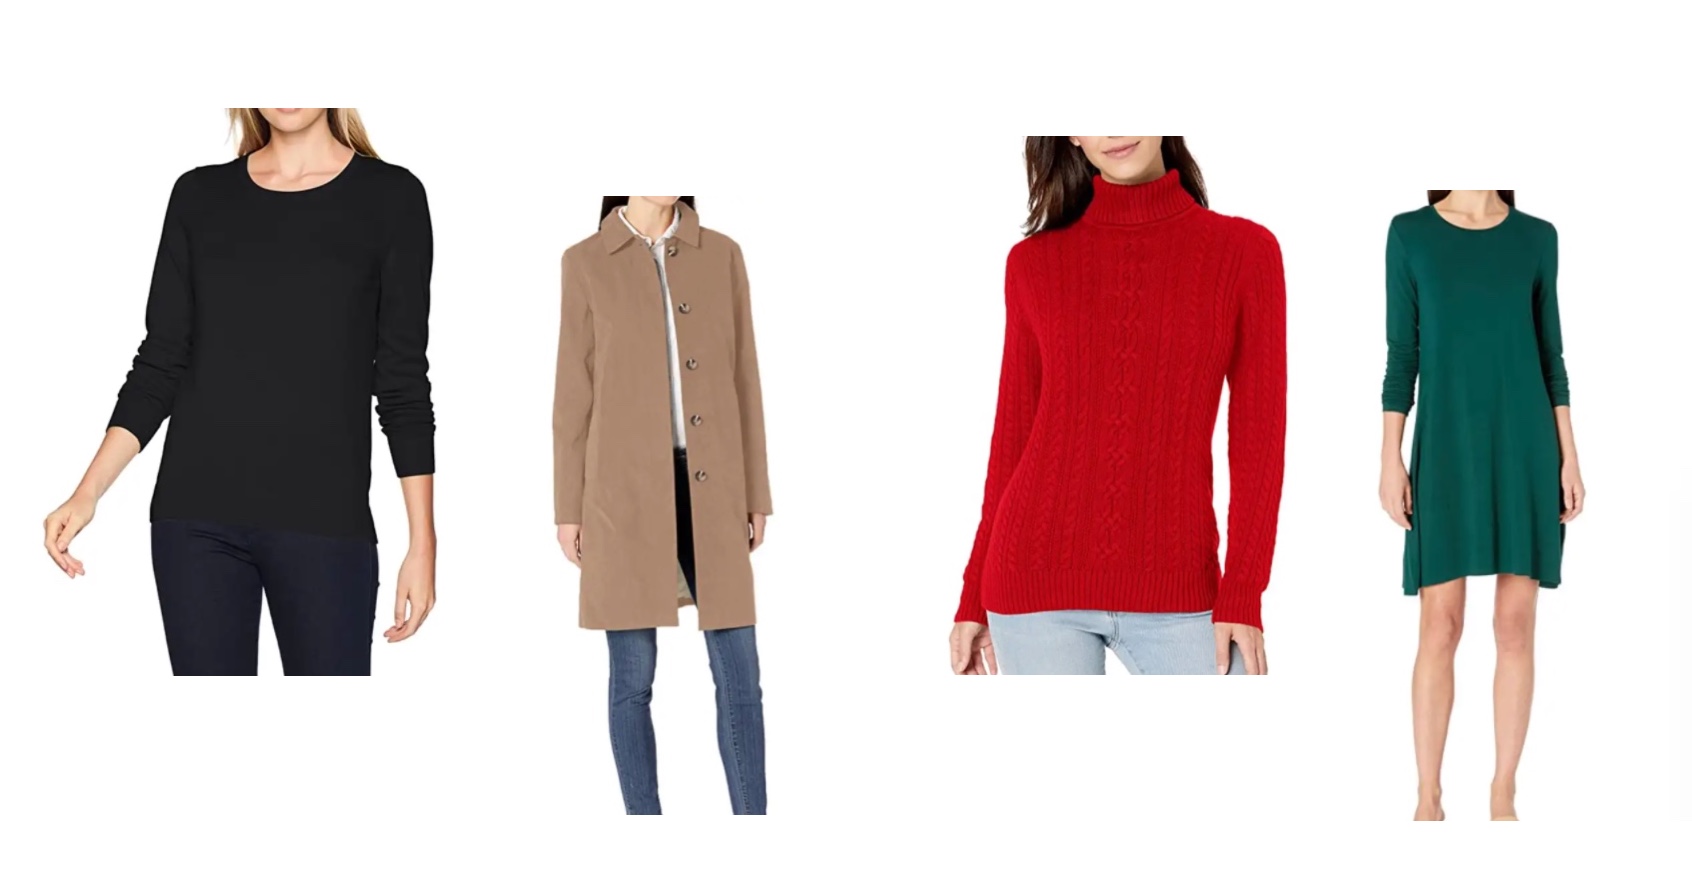 28 Quality Clothing Items for Women by Amazon Essentials That are Less Than $60